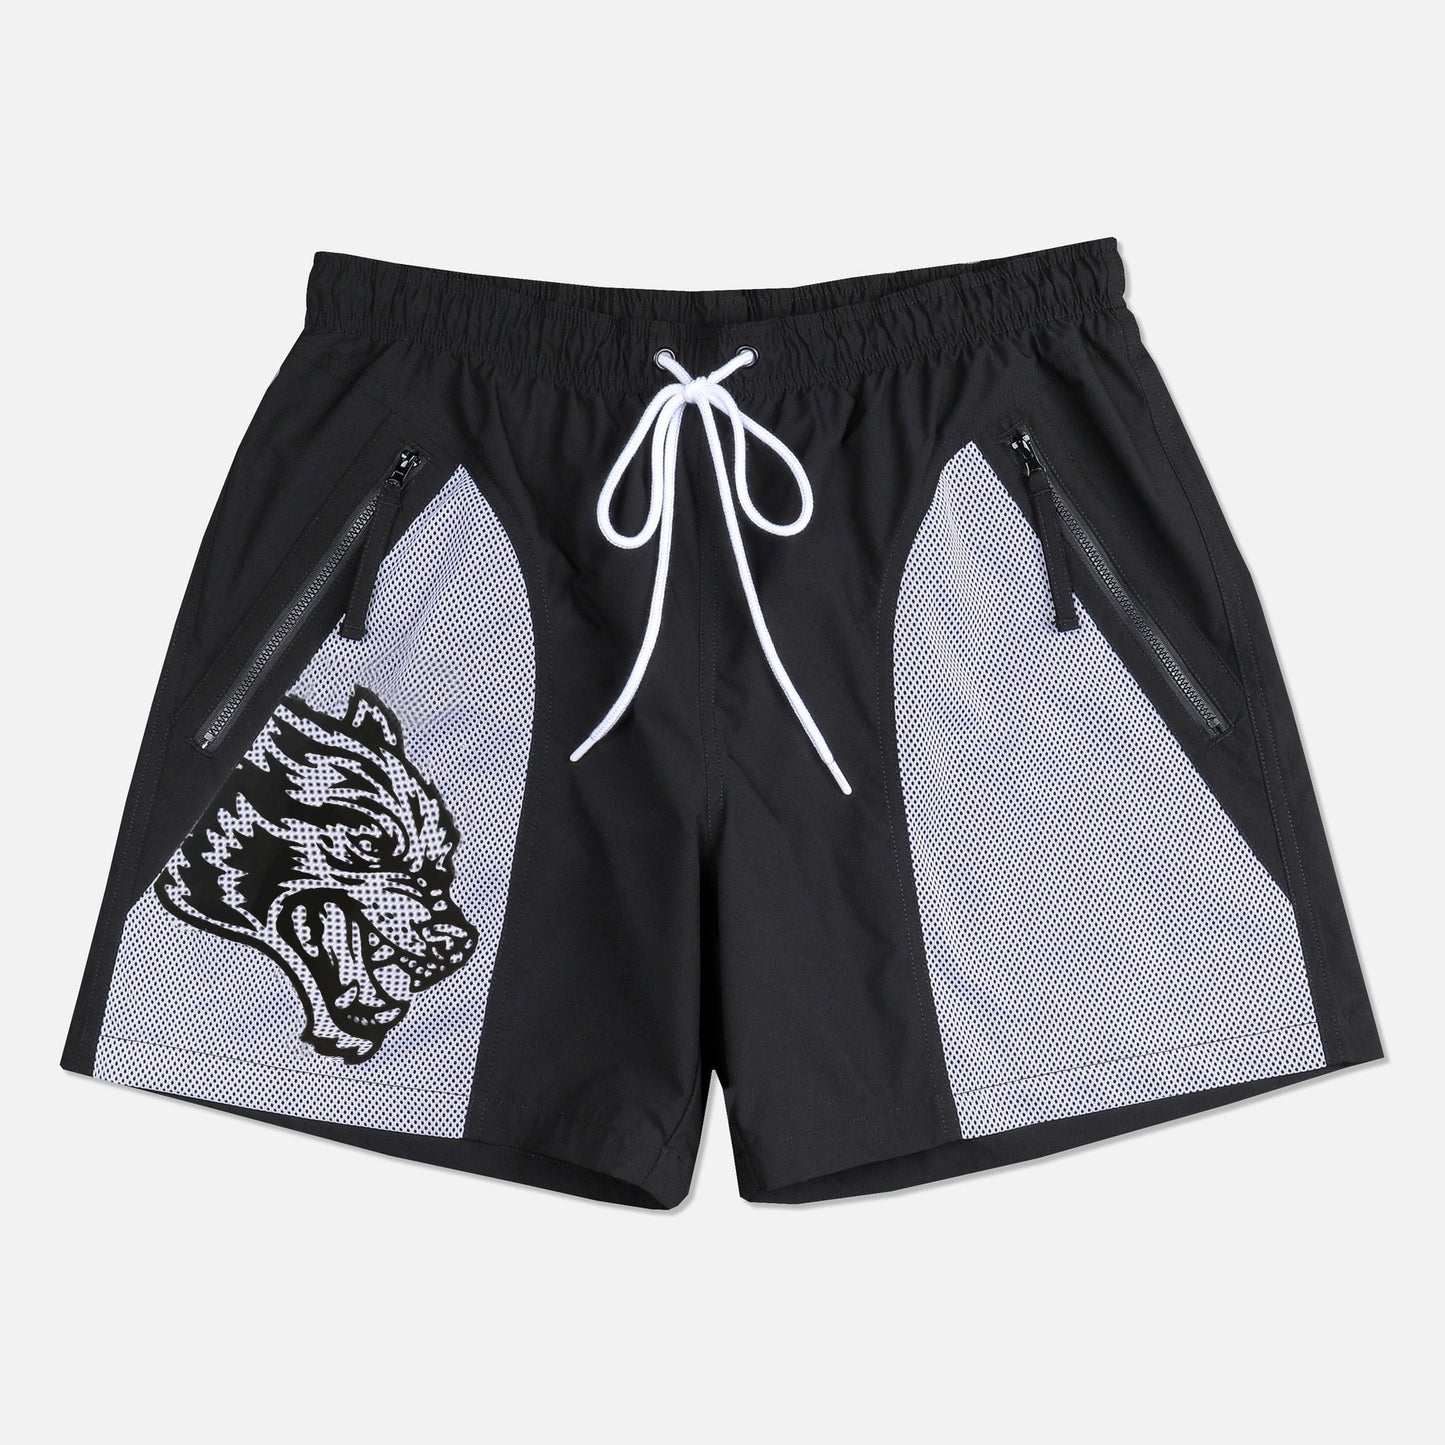 Men's Basketball Sports Shorts for Running and Fitness